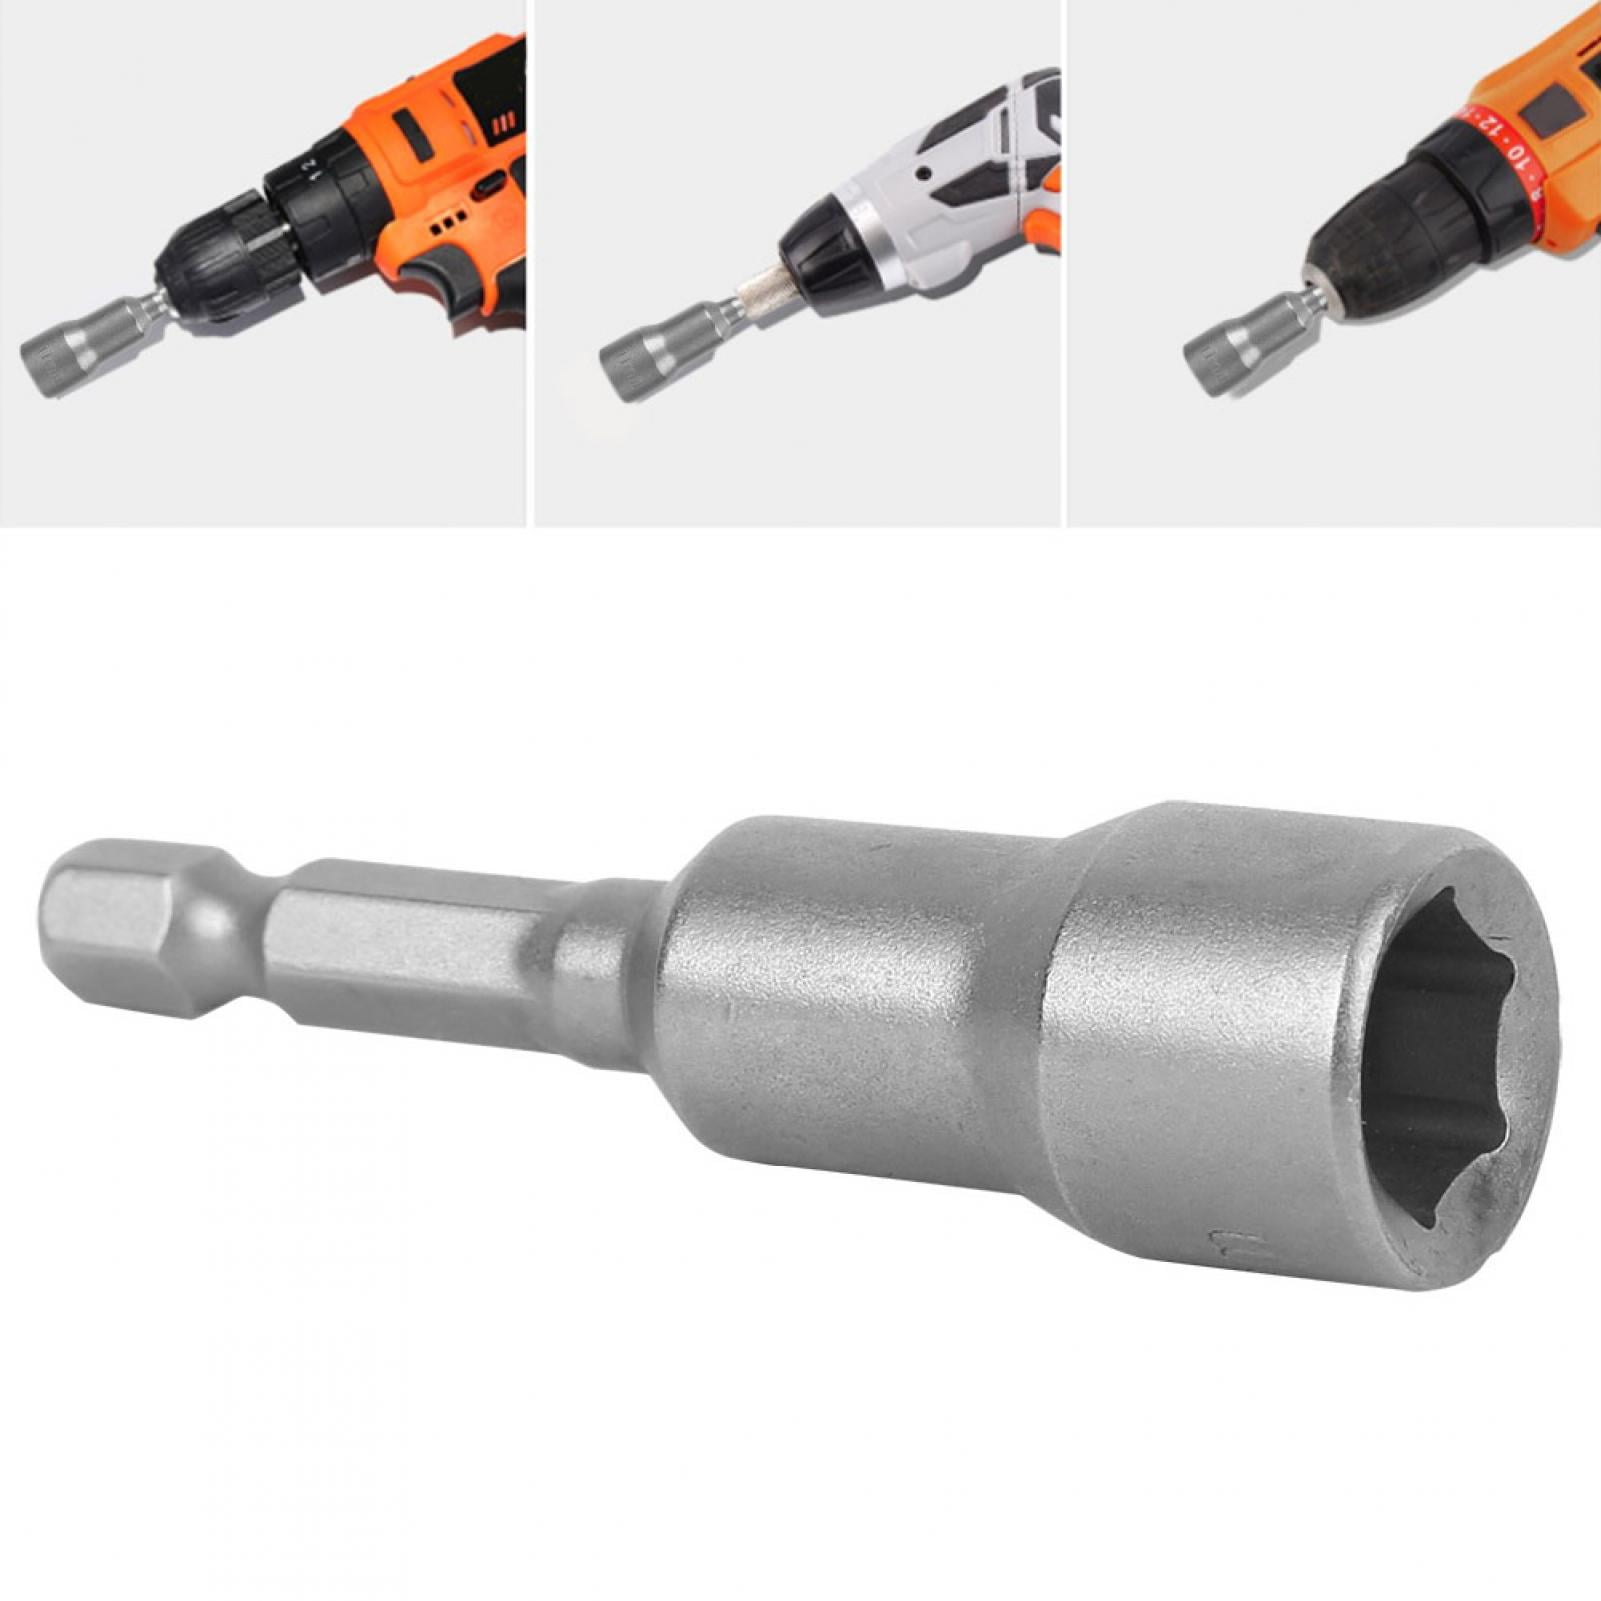 TONGJIANG Practical 5Pcs 11mm Magnetic Hex Socket Tool Steel Electric Screwdriver Magnetic Drill Bit Adapter Perfect Small Tool 